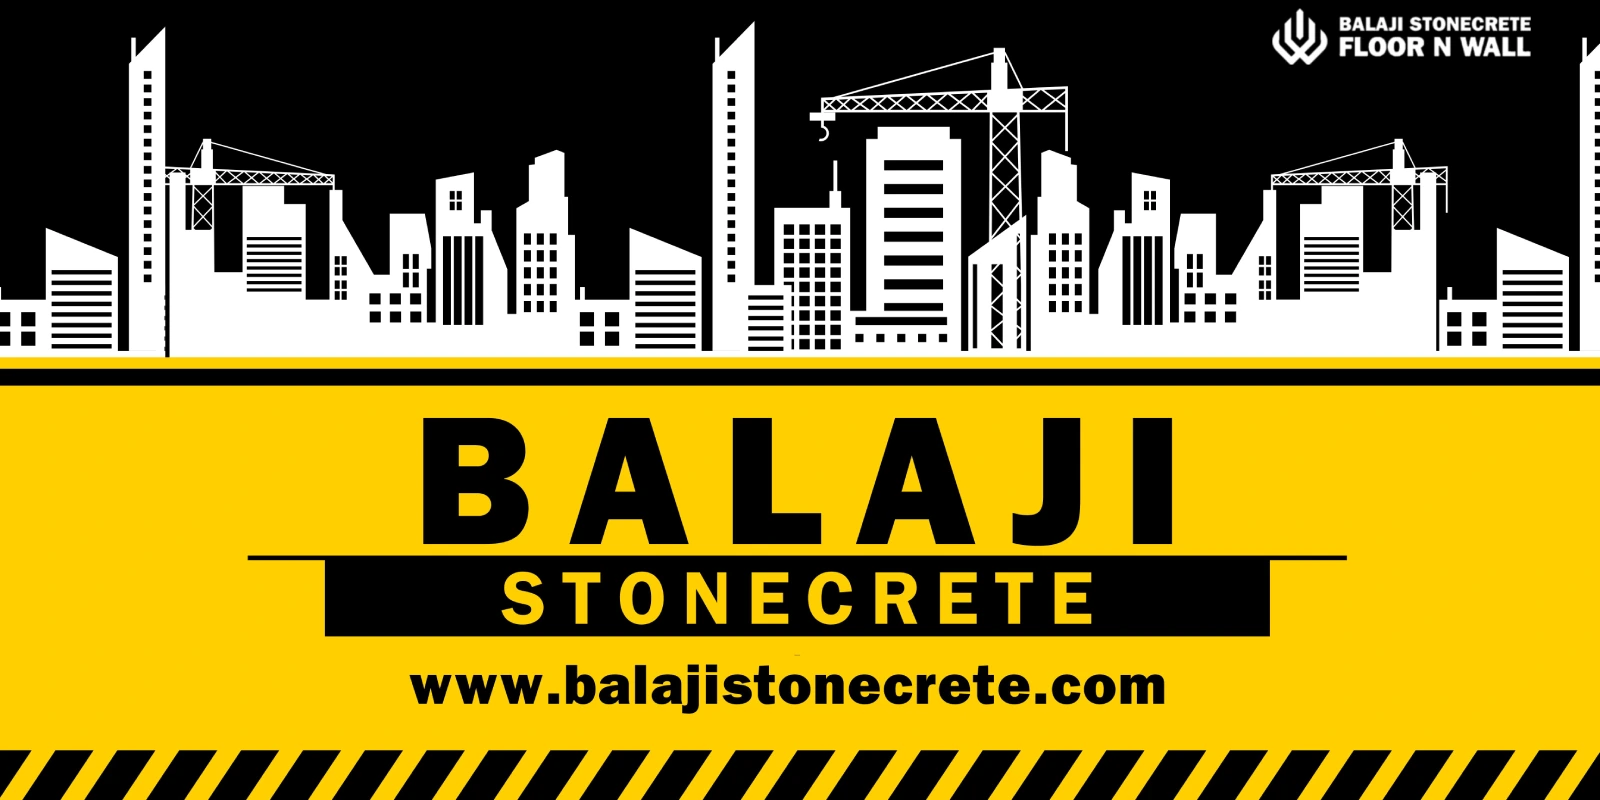 Experience the elegance and durability of Balaji Stonecrete's premium materials. From home renovations to commercial upgrades, our products offer timeless sophistication and unmatched quality. Trust Balaji Stonecrete for superior style and durability.